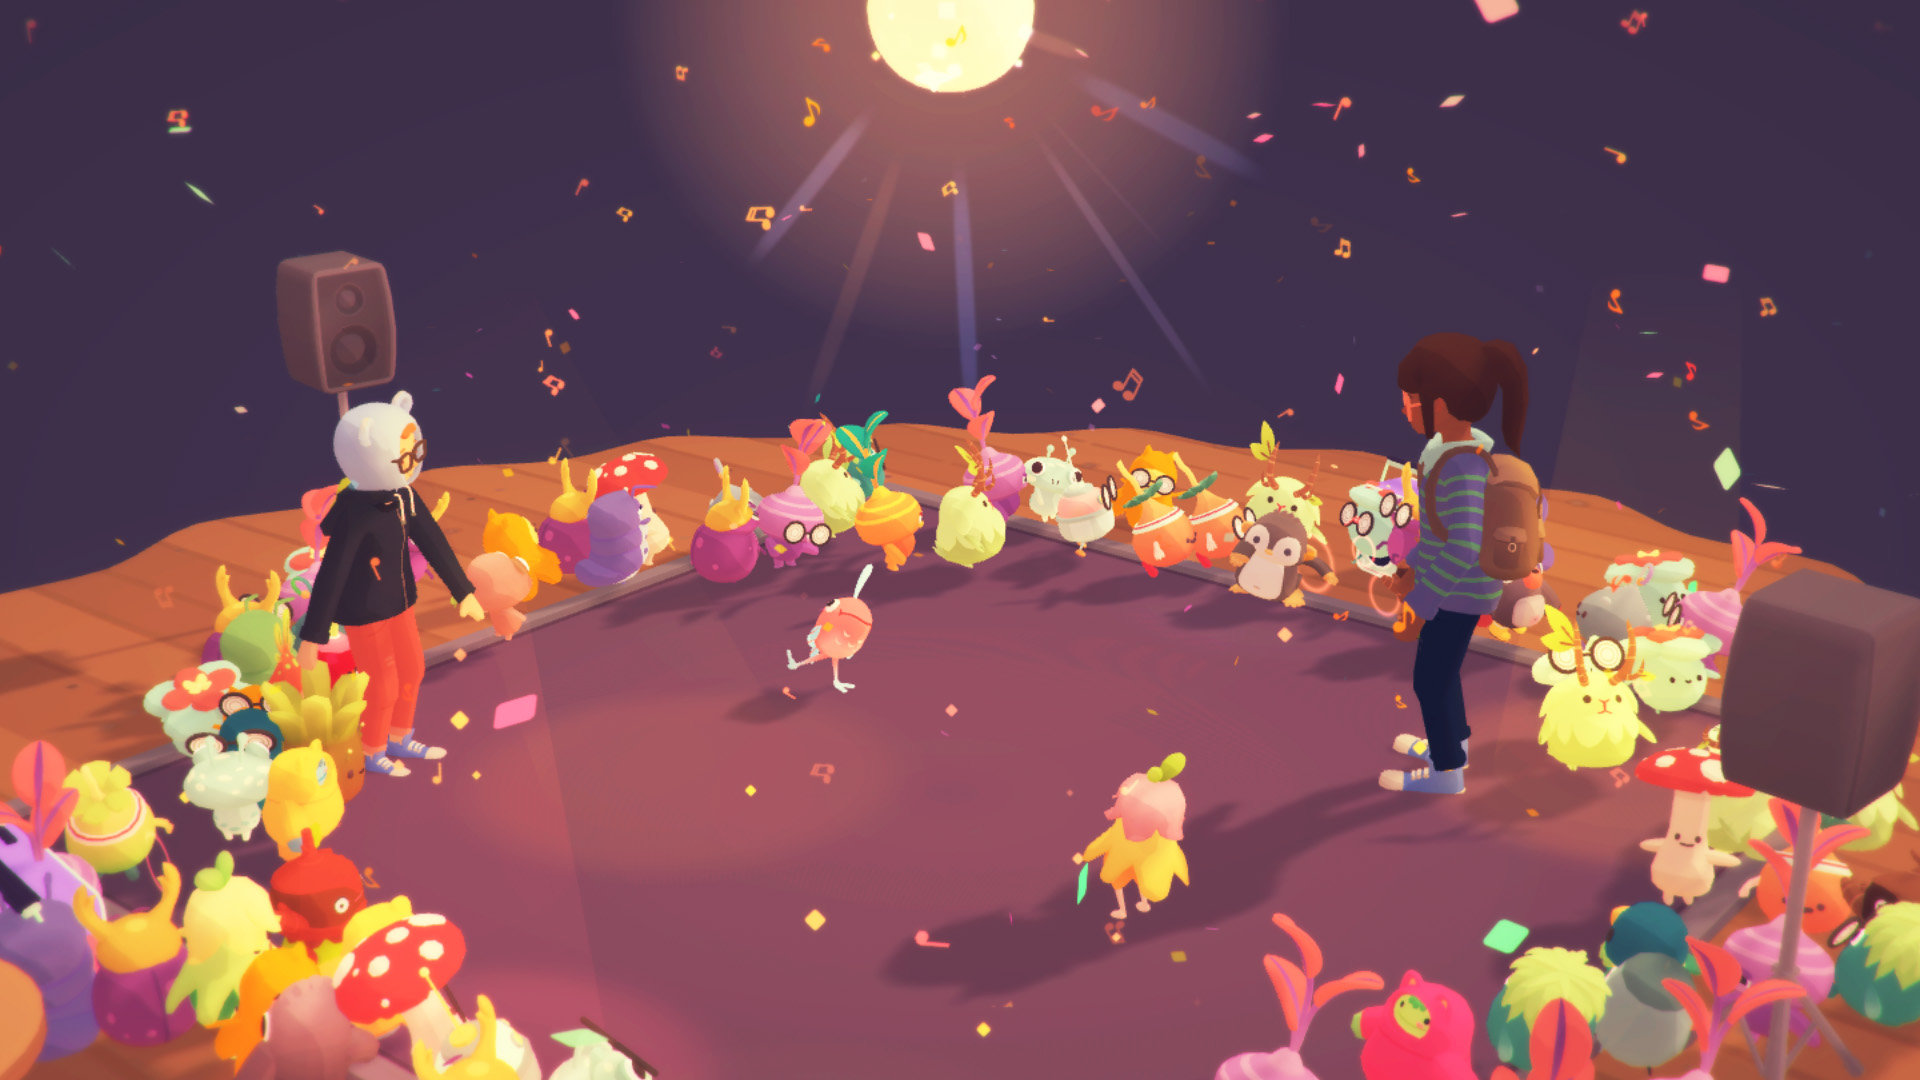 Ooblets screenshot of two characters in a circle of Ooblets preparing for a dance party